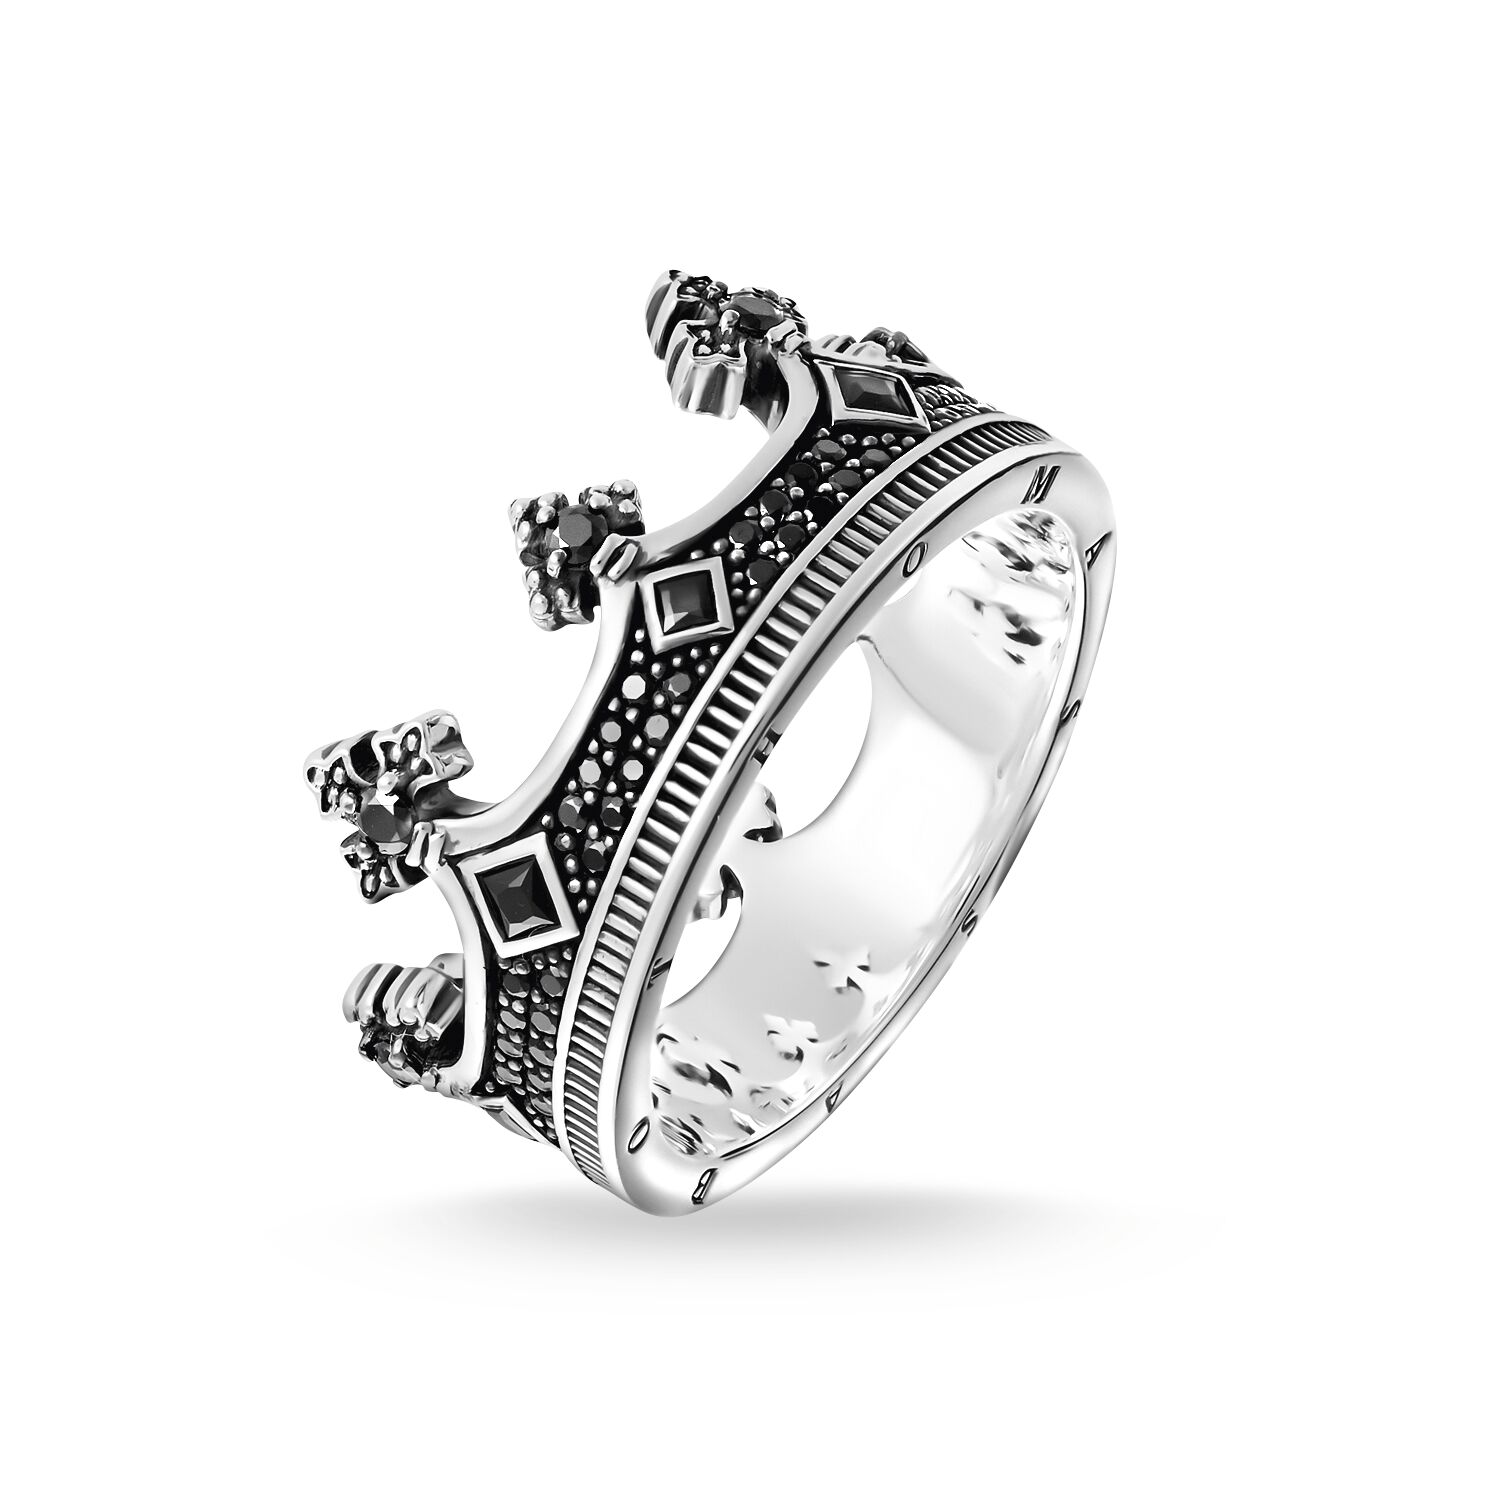 Wholesale Custom Mens ring jewelry made of OEM/ODM Jewelry blackened 925 Sterling silver offer OEM service